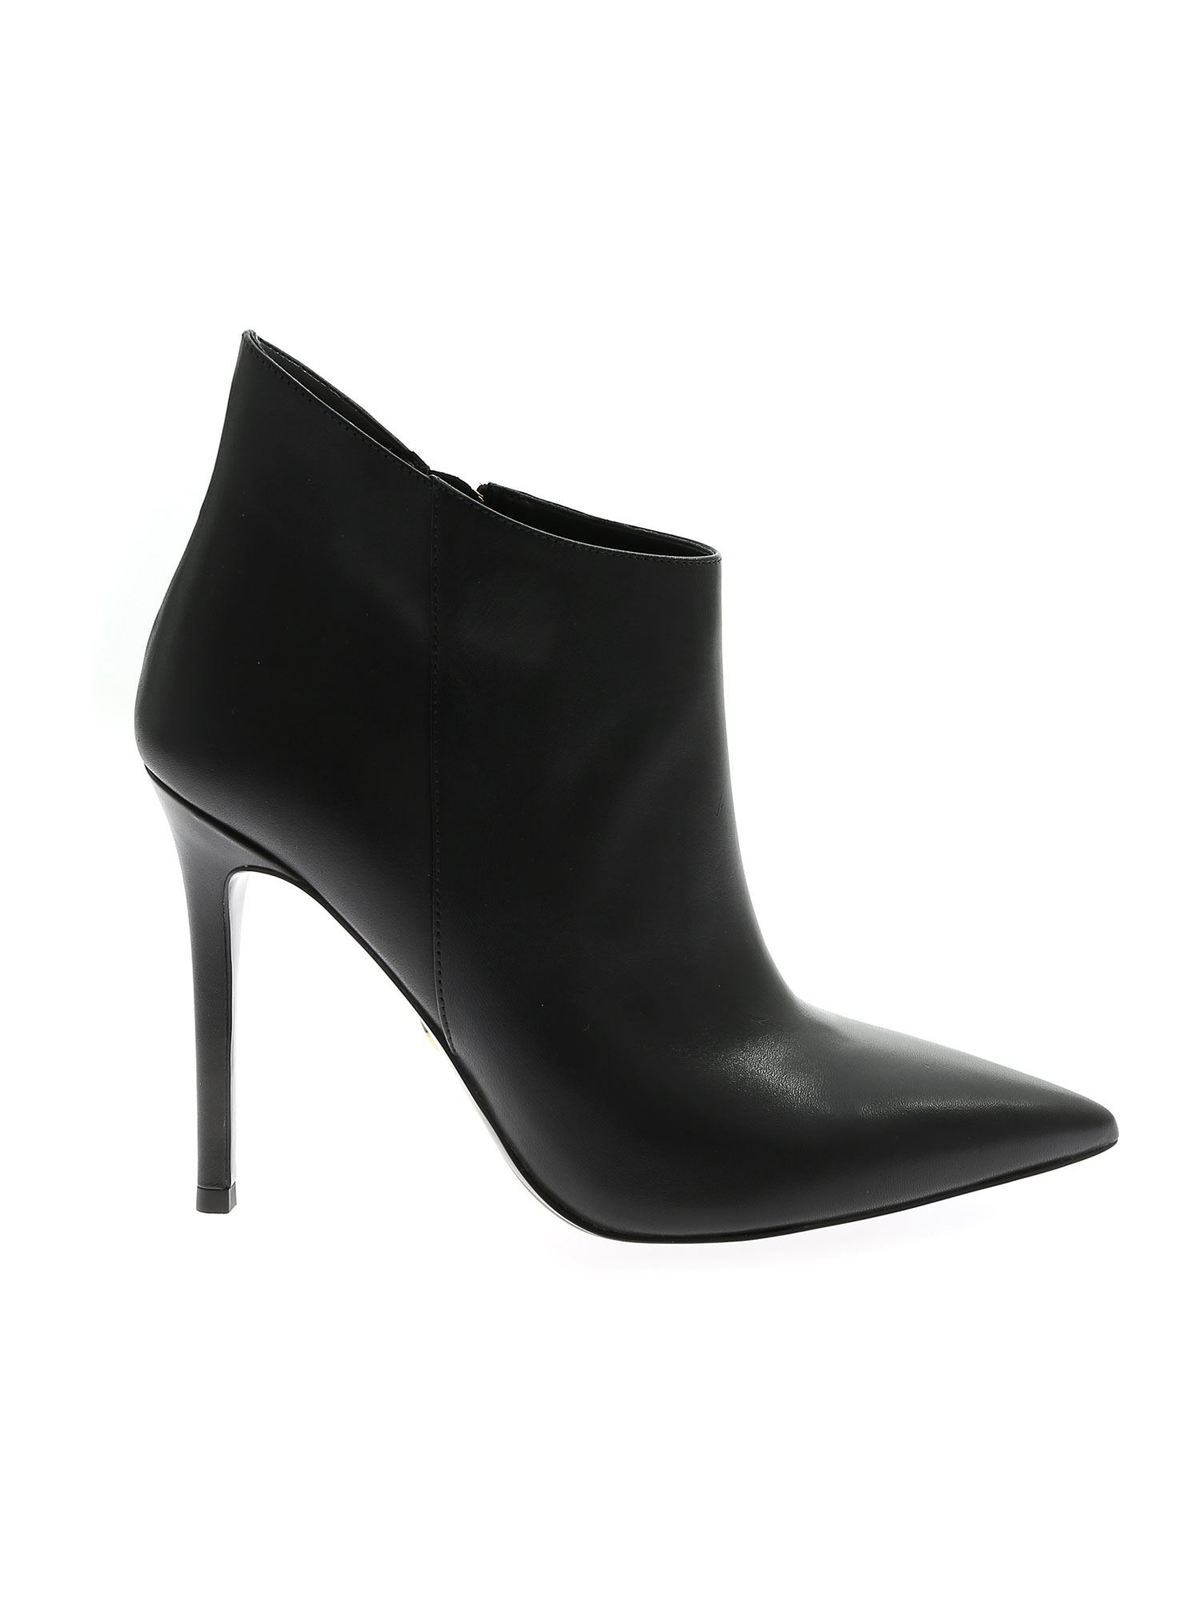 MICHAEL KORS ANTONIA POINTED BOOTS IN BLACK